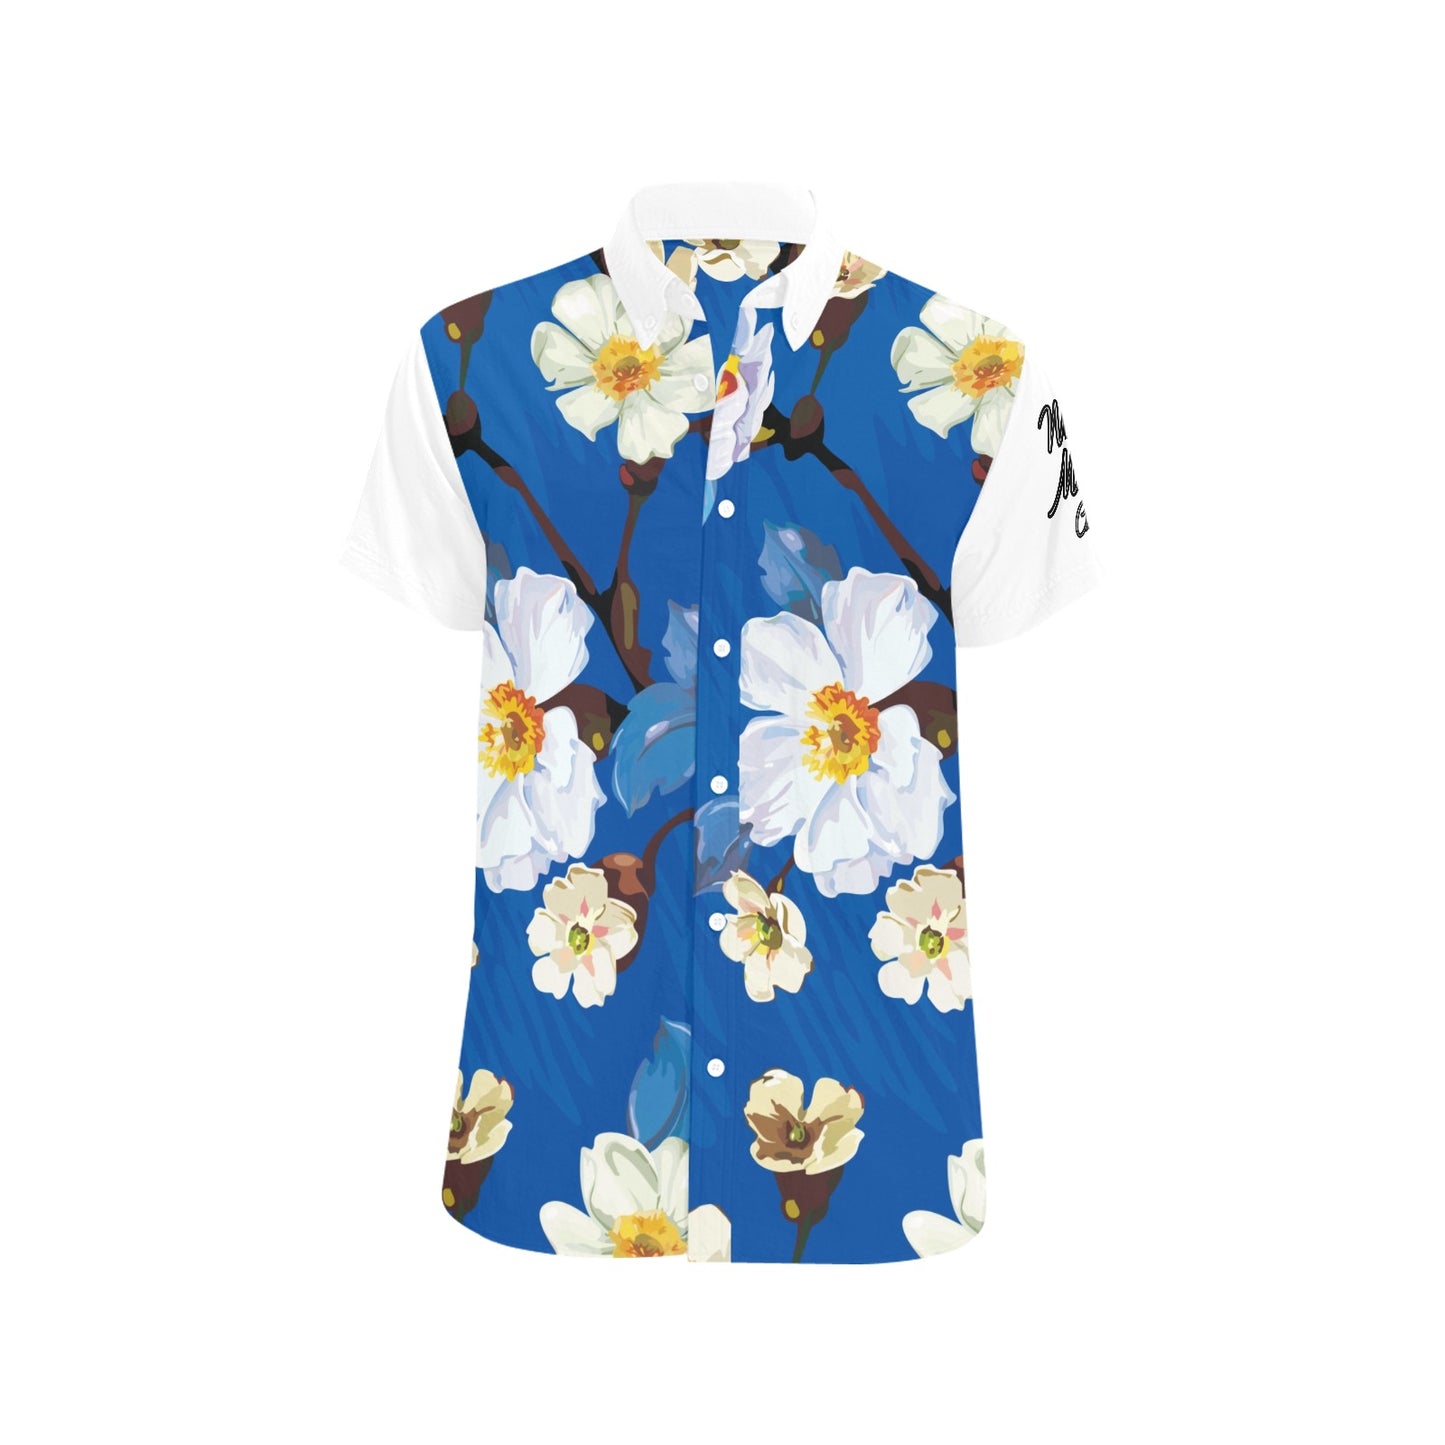 William Michael's Mens Pansies Short Sleeve Button Down